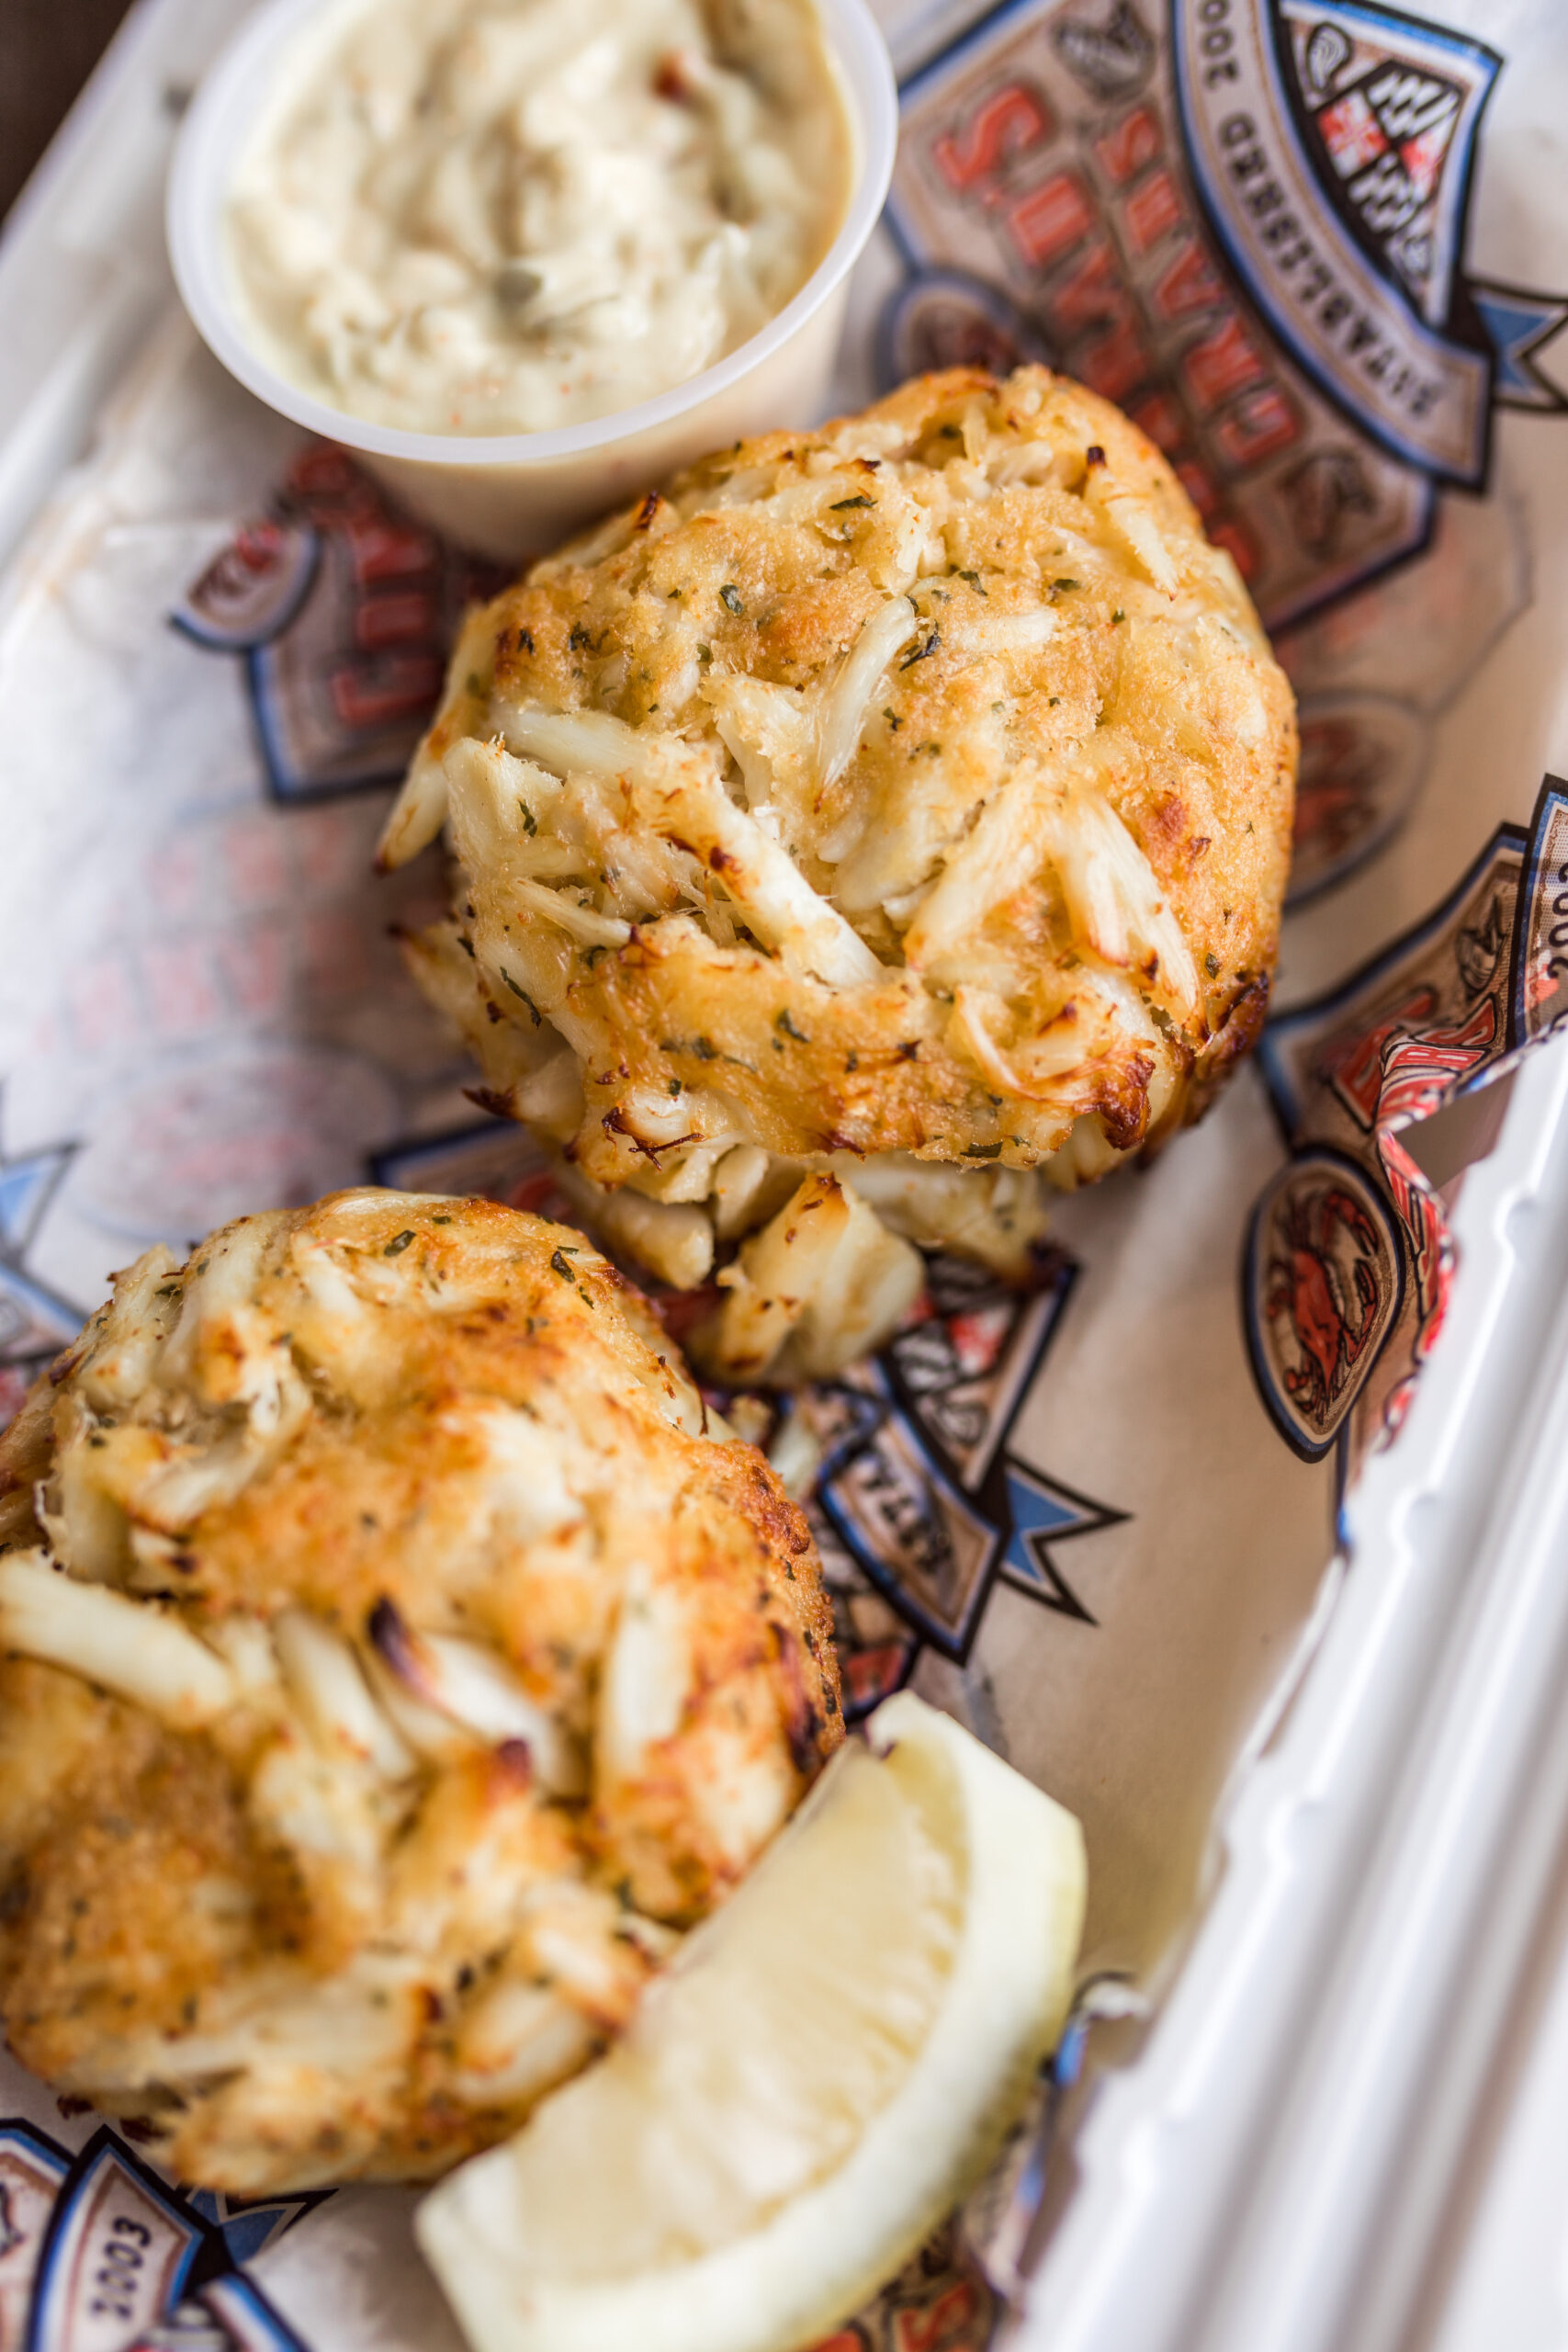 Maryland-Style Old Bay Crab Cakes - The Foodie Physician